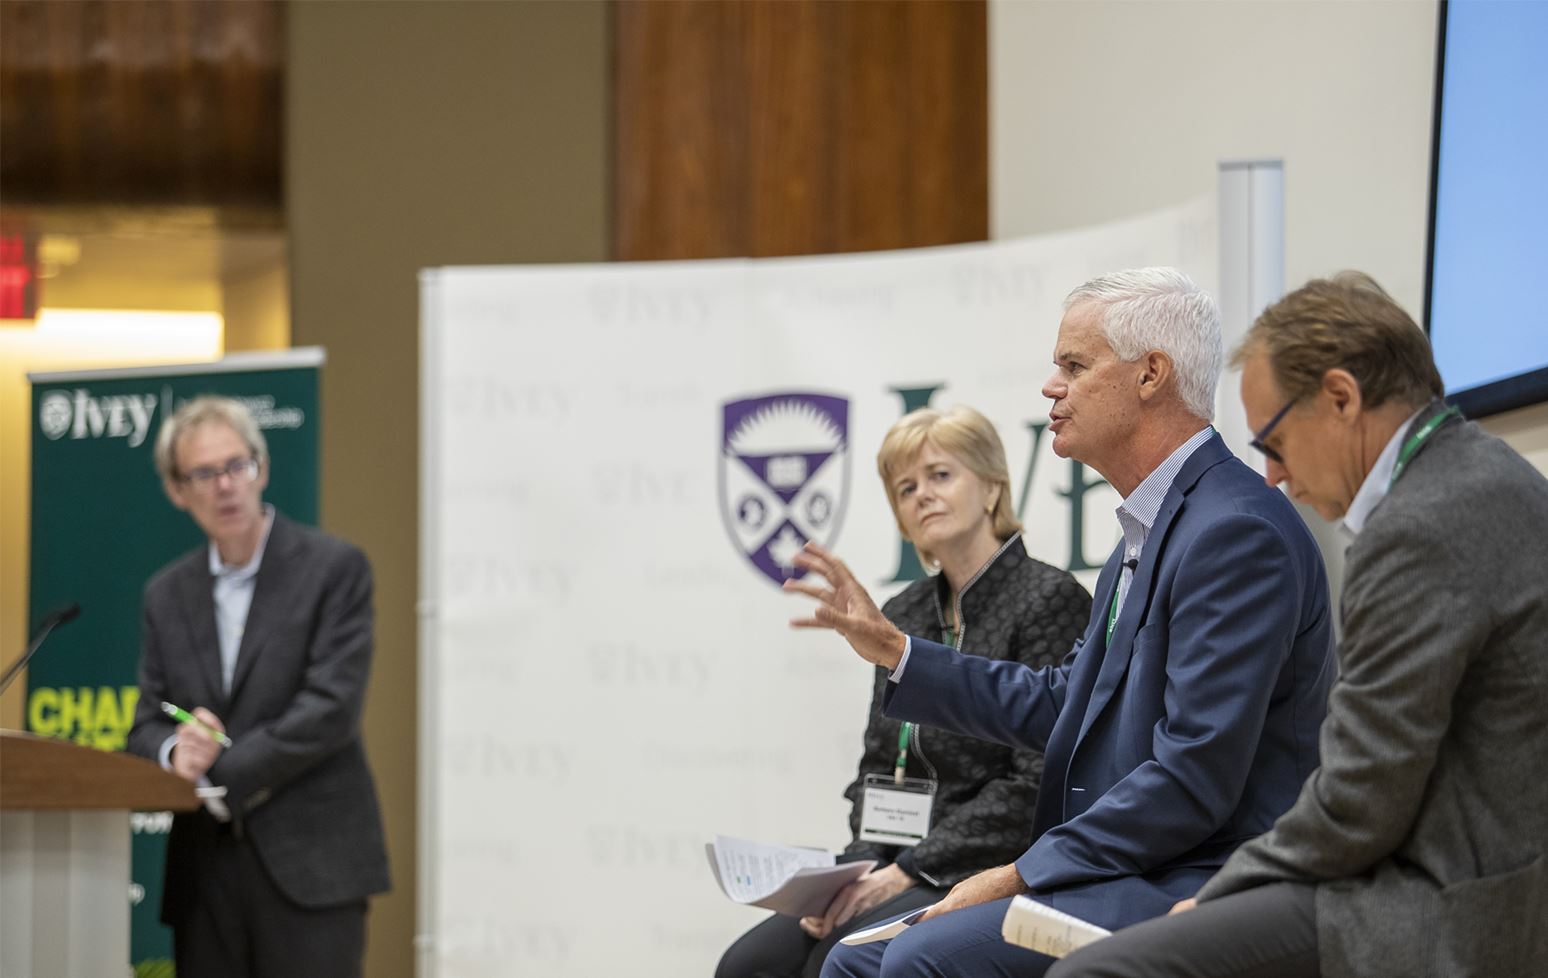 MBA Leadership Day inspires students to lead with character